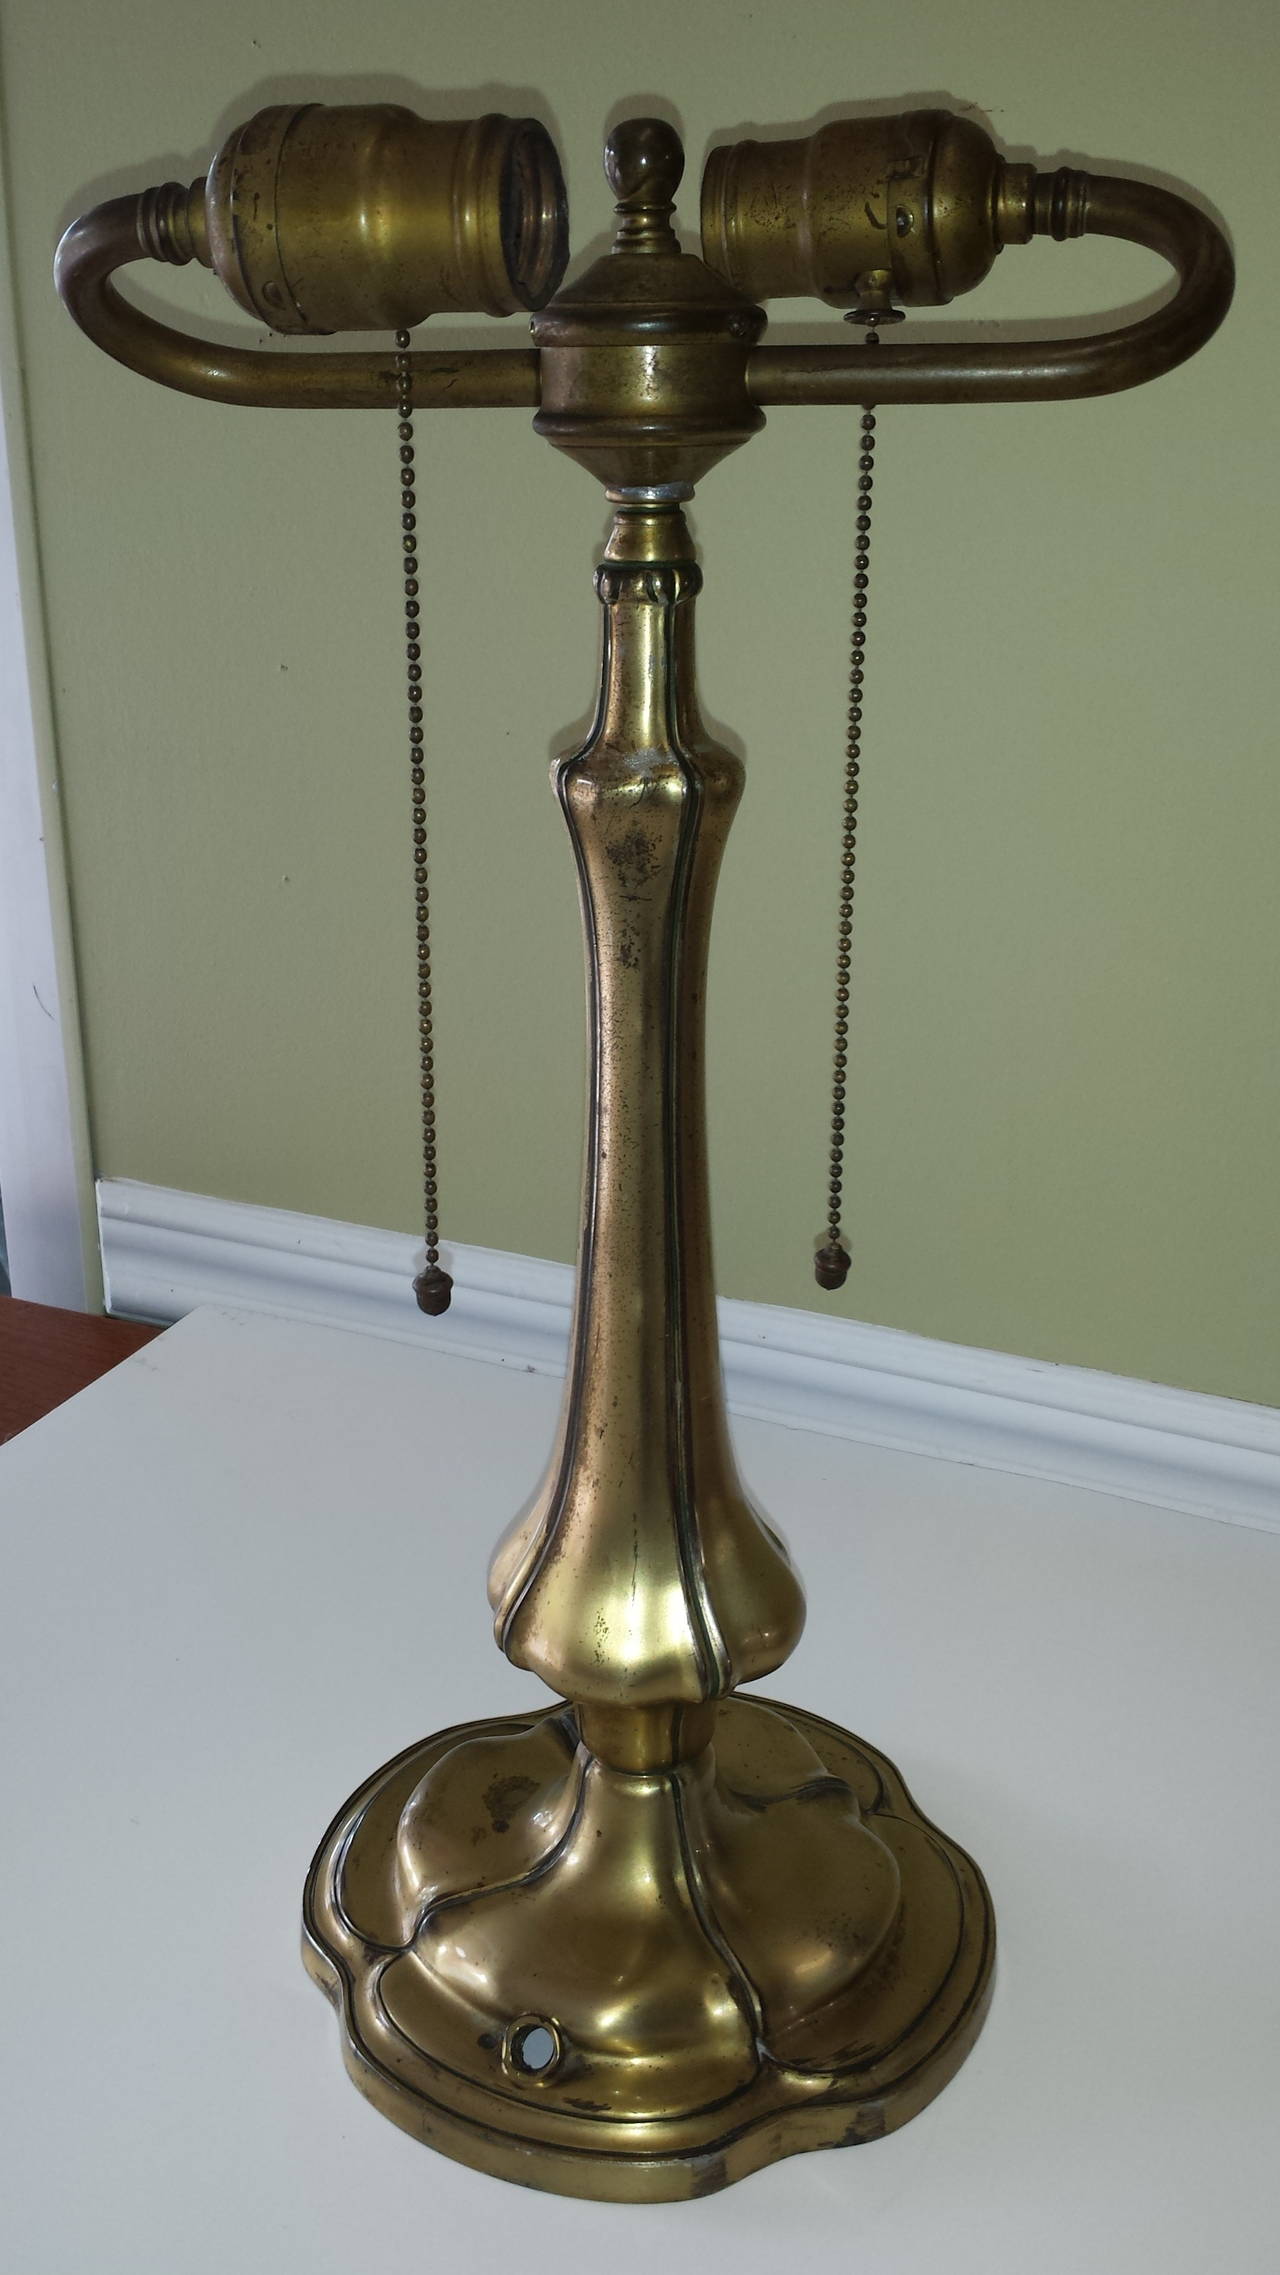 Pairpoint Table Lamp Base in an Antique Brass Finish with Double Sockets, The lamp is marked on the base Pairpoint Mfg. Co. with a Diamond and a P in center & Numbered B 3029, The lamp is 17"-inches high x 9"-inches wide, Both original